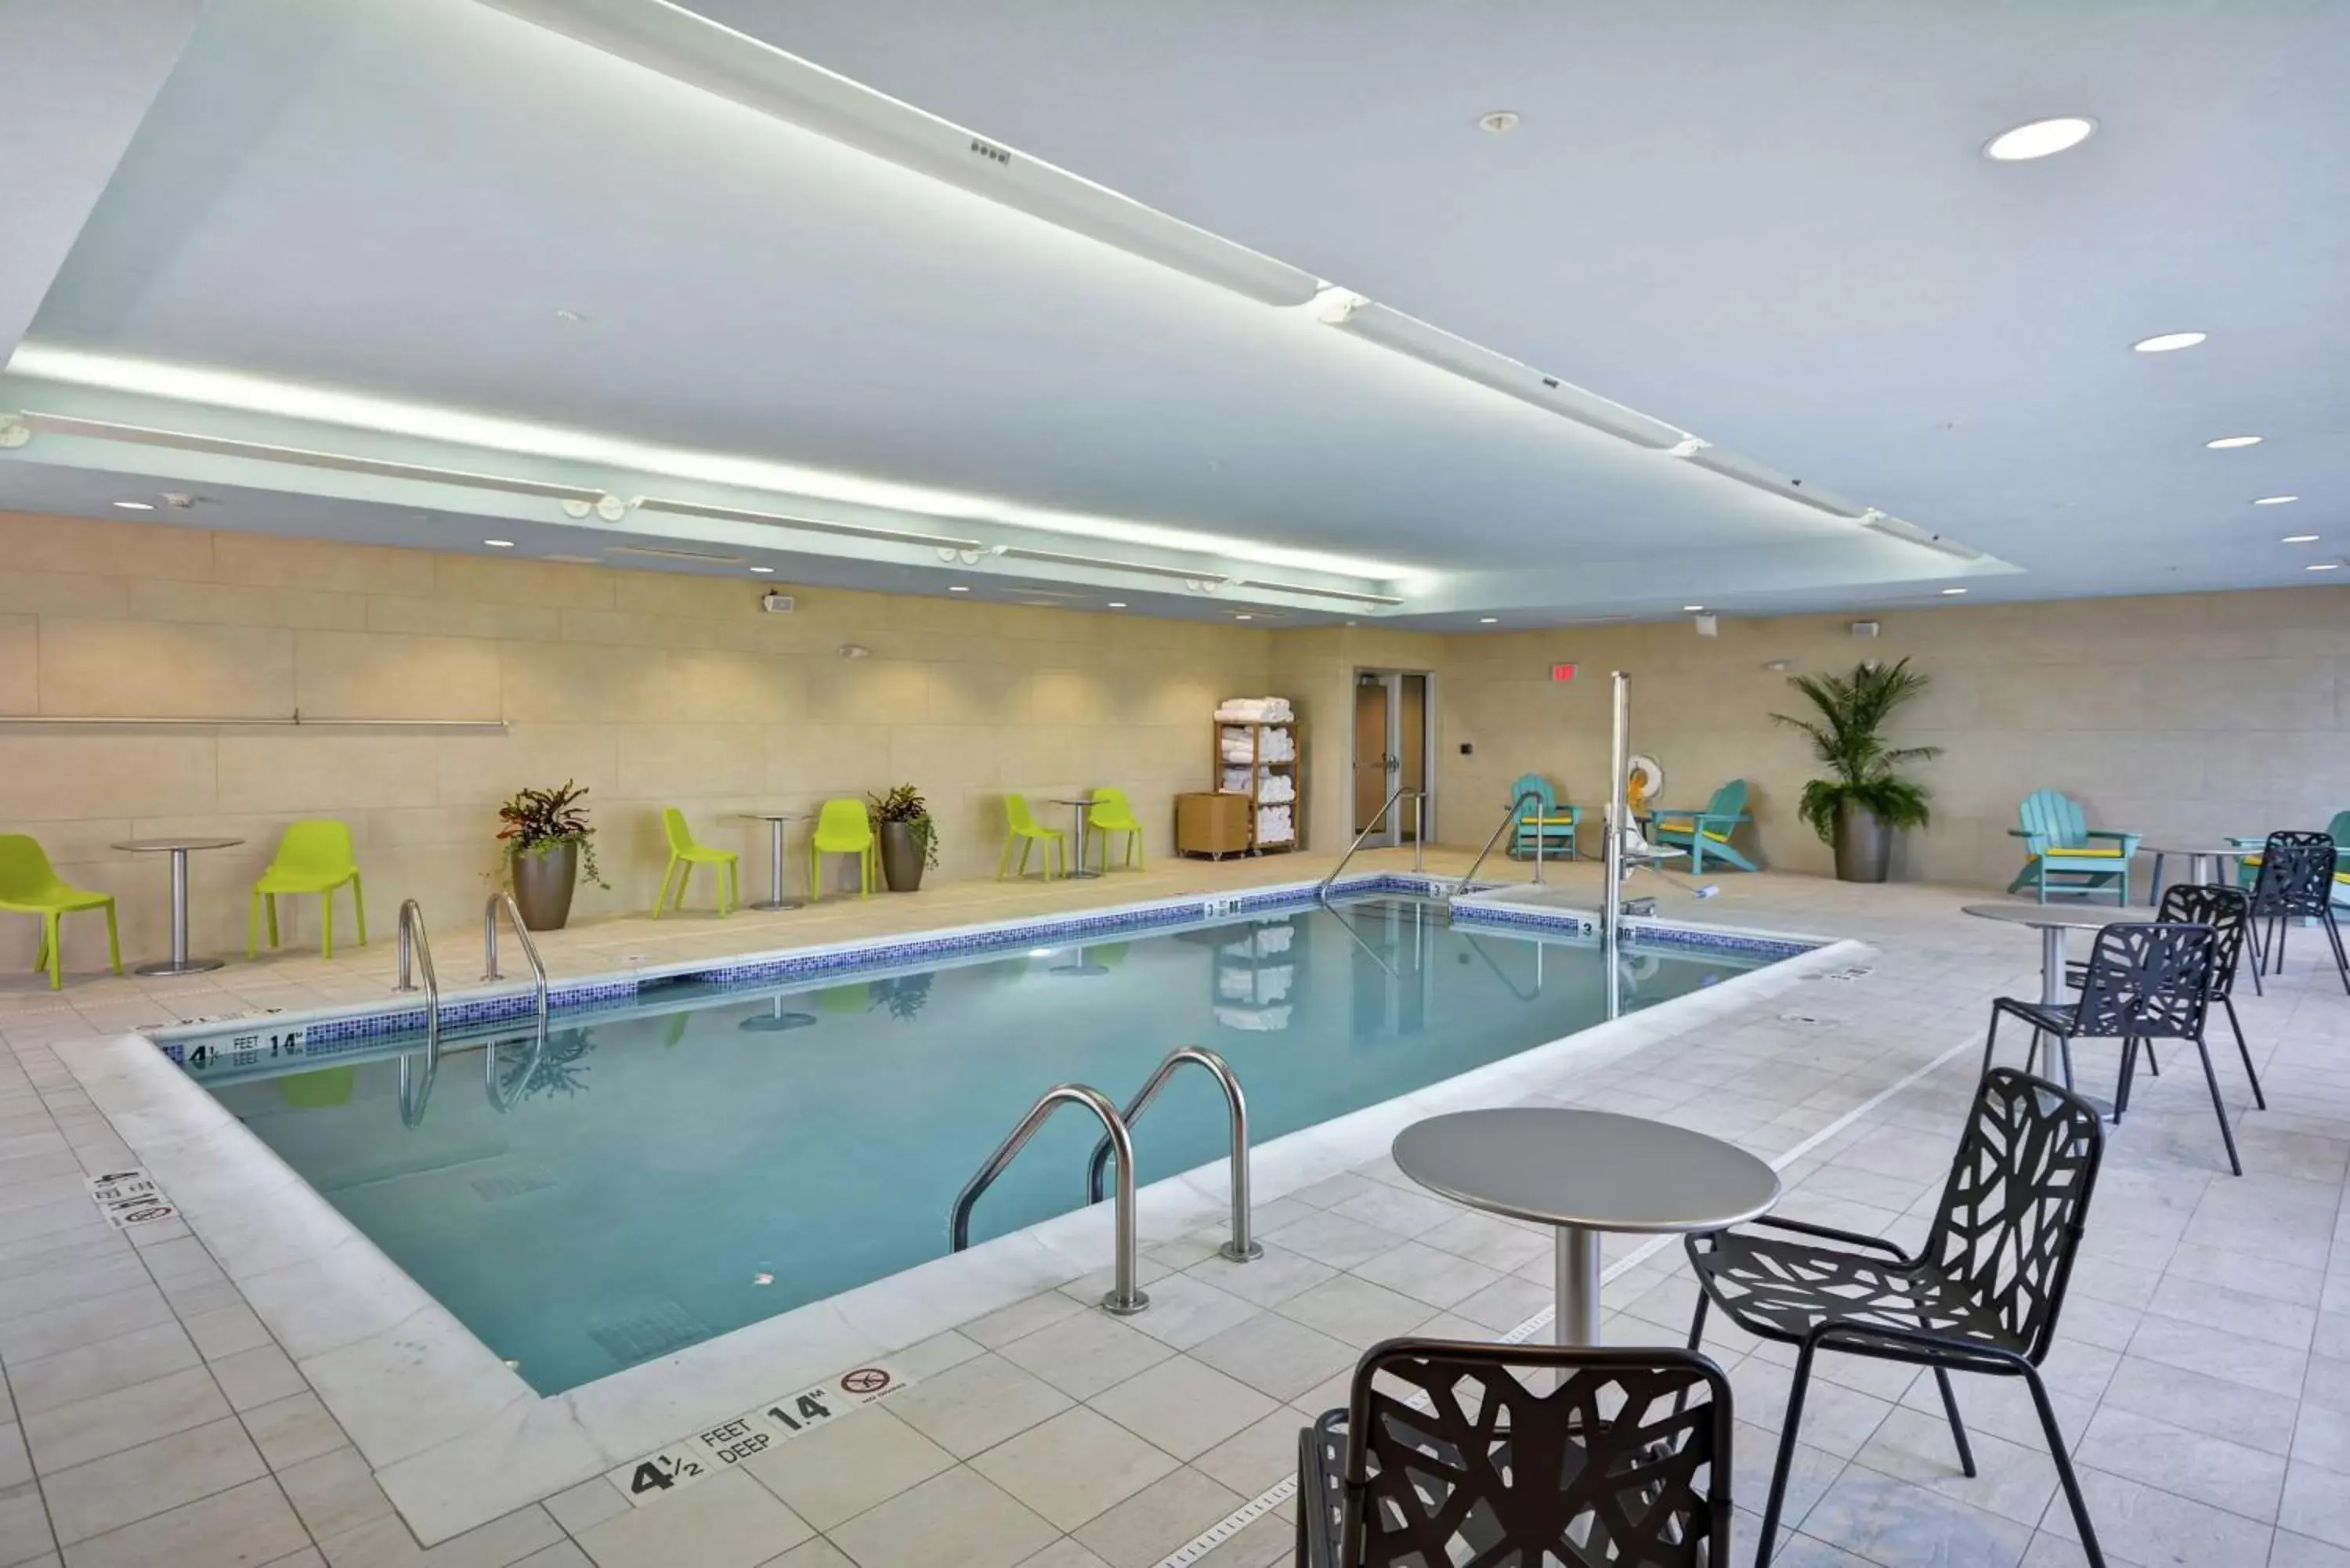 Swimming Pool in Home2 Suites by Hilton Queensbury Lake George